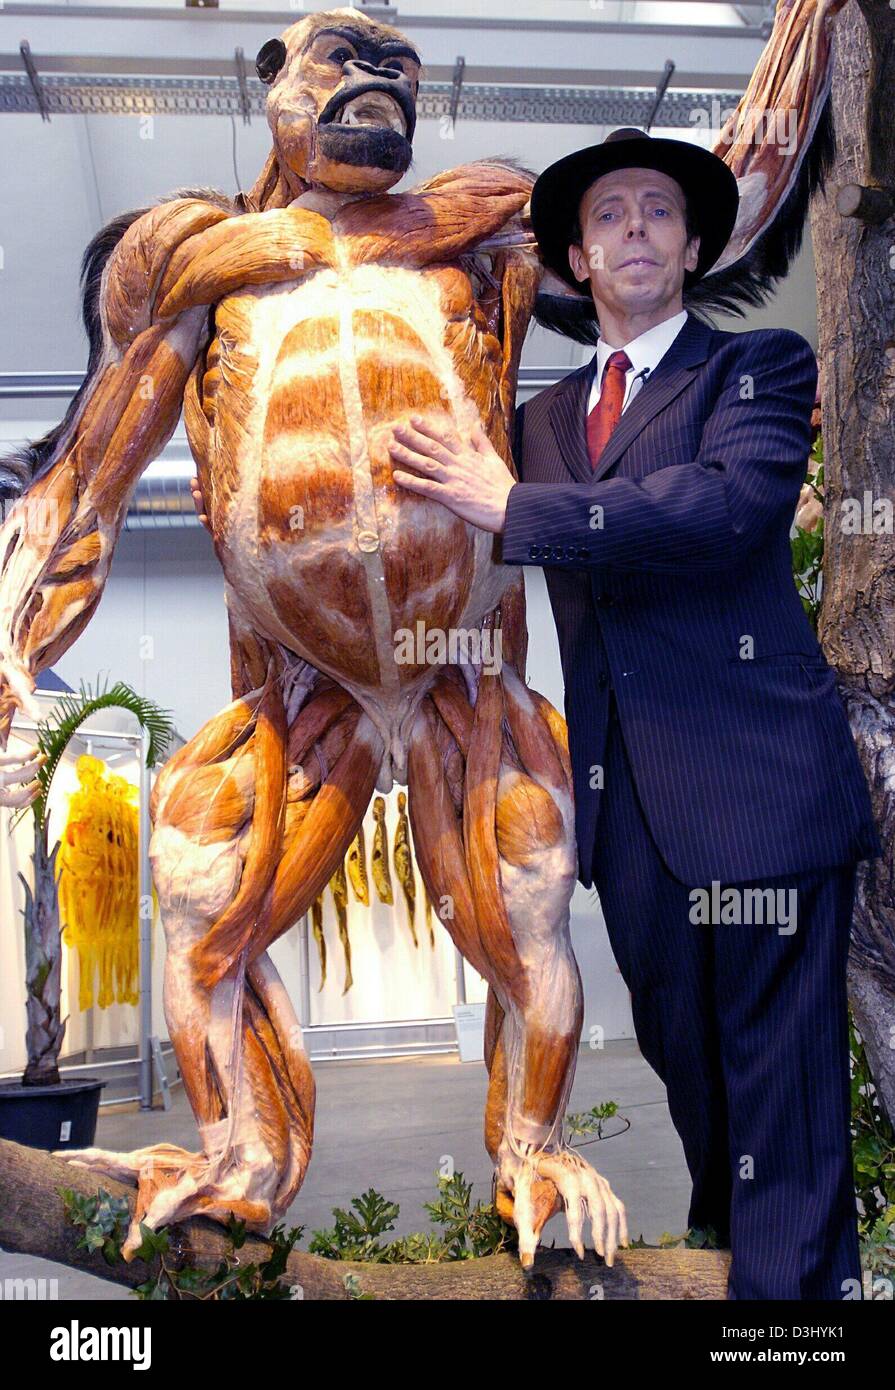 dpa) - Professor Gunther von Hagens from Heidelberg poses next to a  plastinated gorilla during a press conference for his exhibition 'Body  Worlds' at the Naxos Halle in Frankfurt, Germany, 15 January